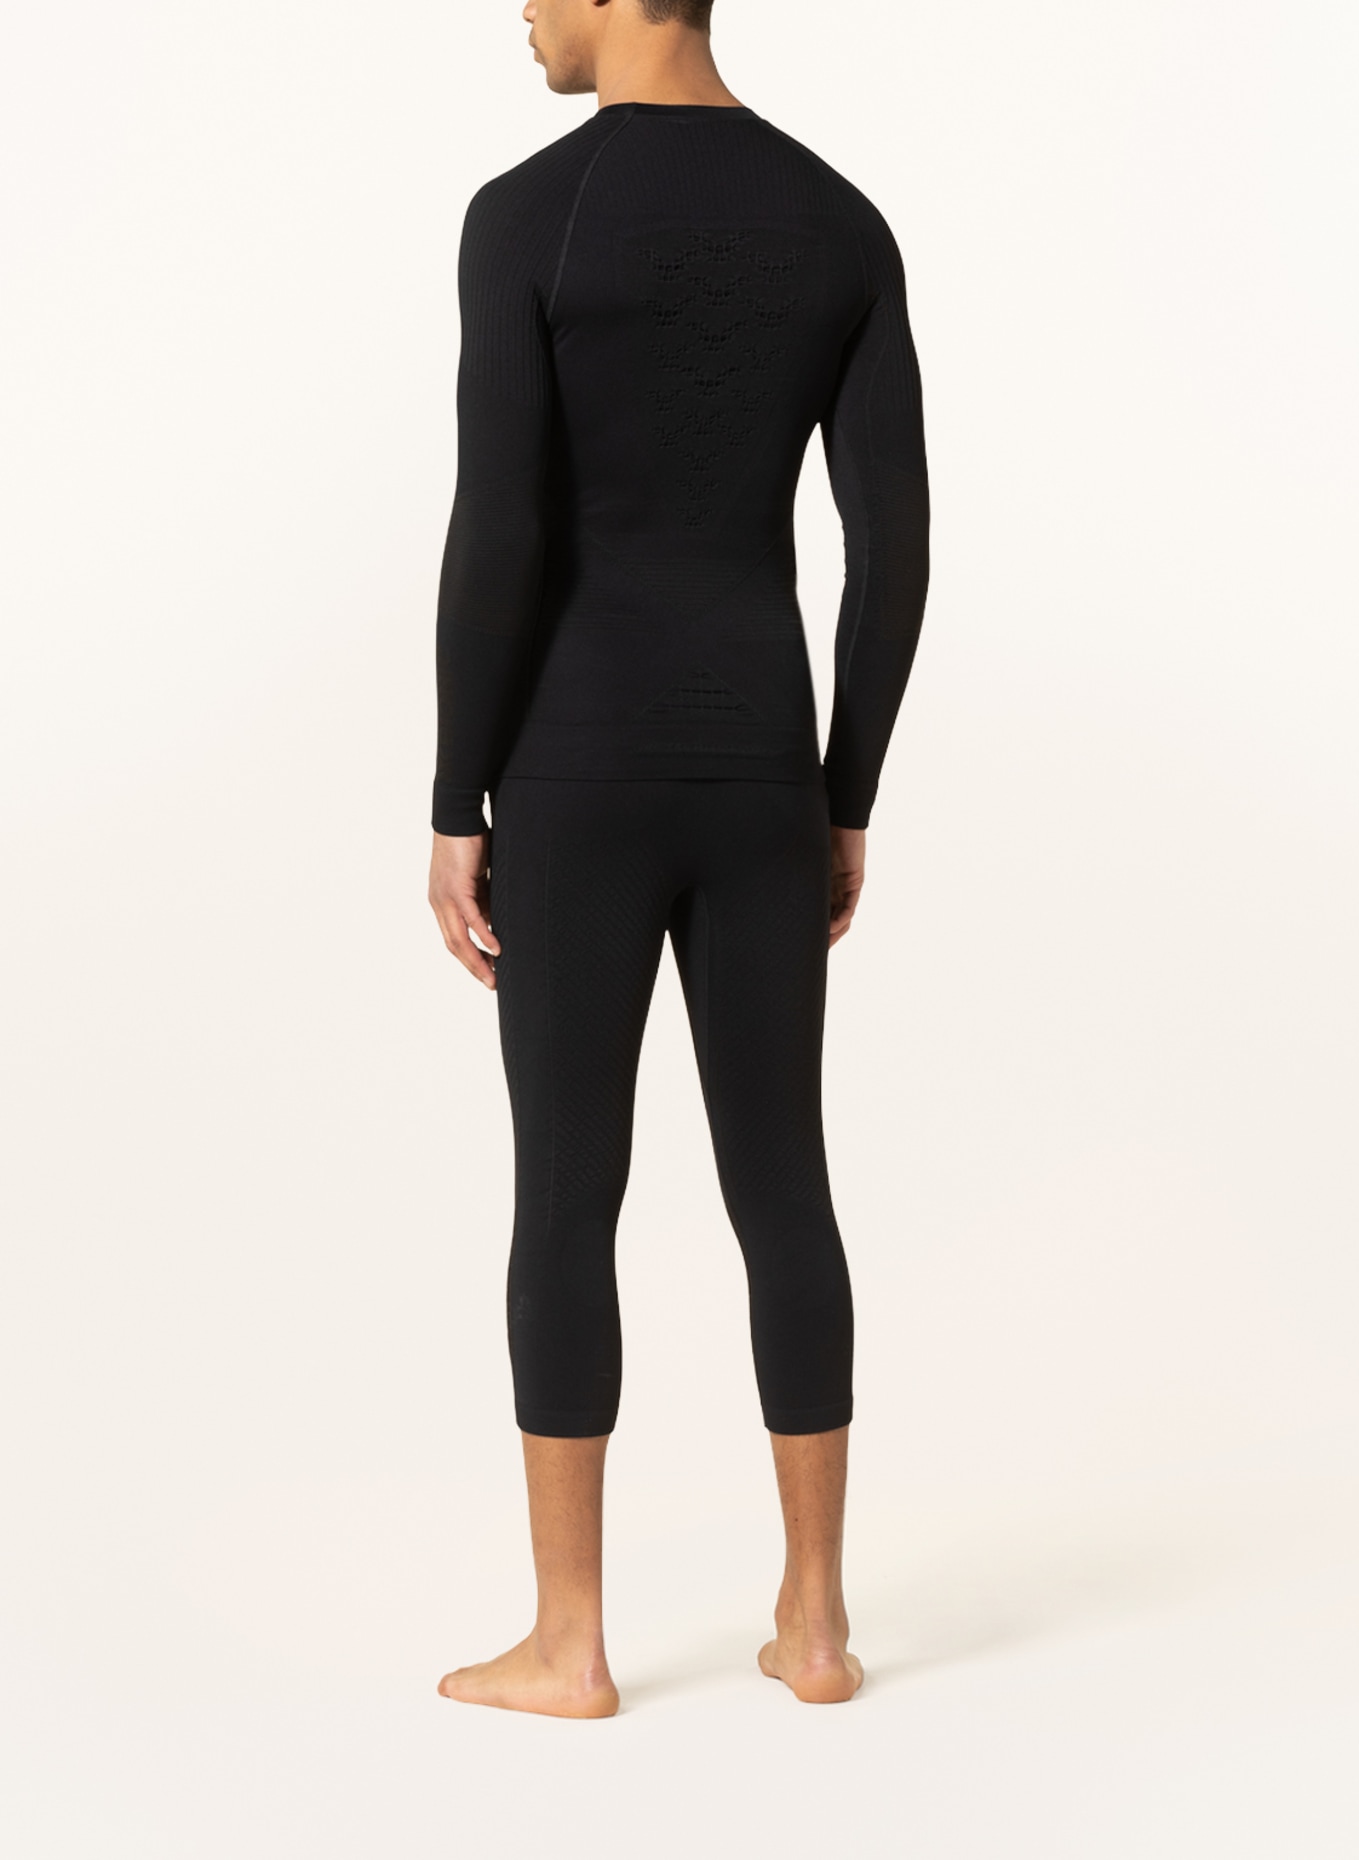 X-BIONIC Functional baselayer trousers ENERGY ACCUMULATOR® 4.0 with cropped leg length, Color: BLACK (Image 3)